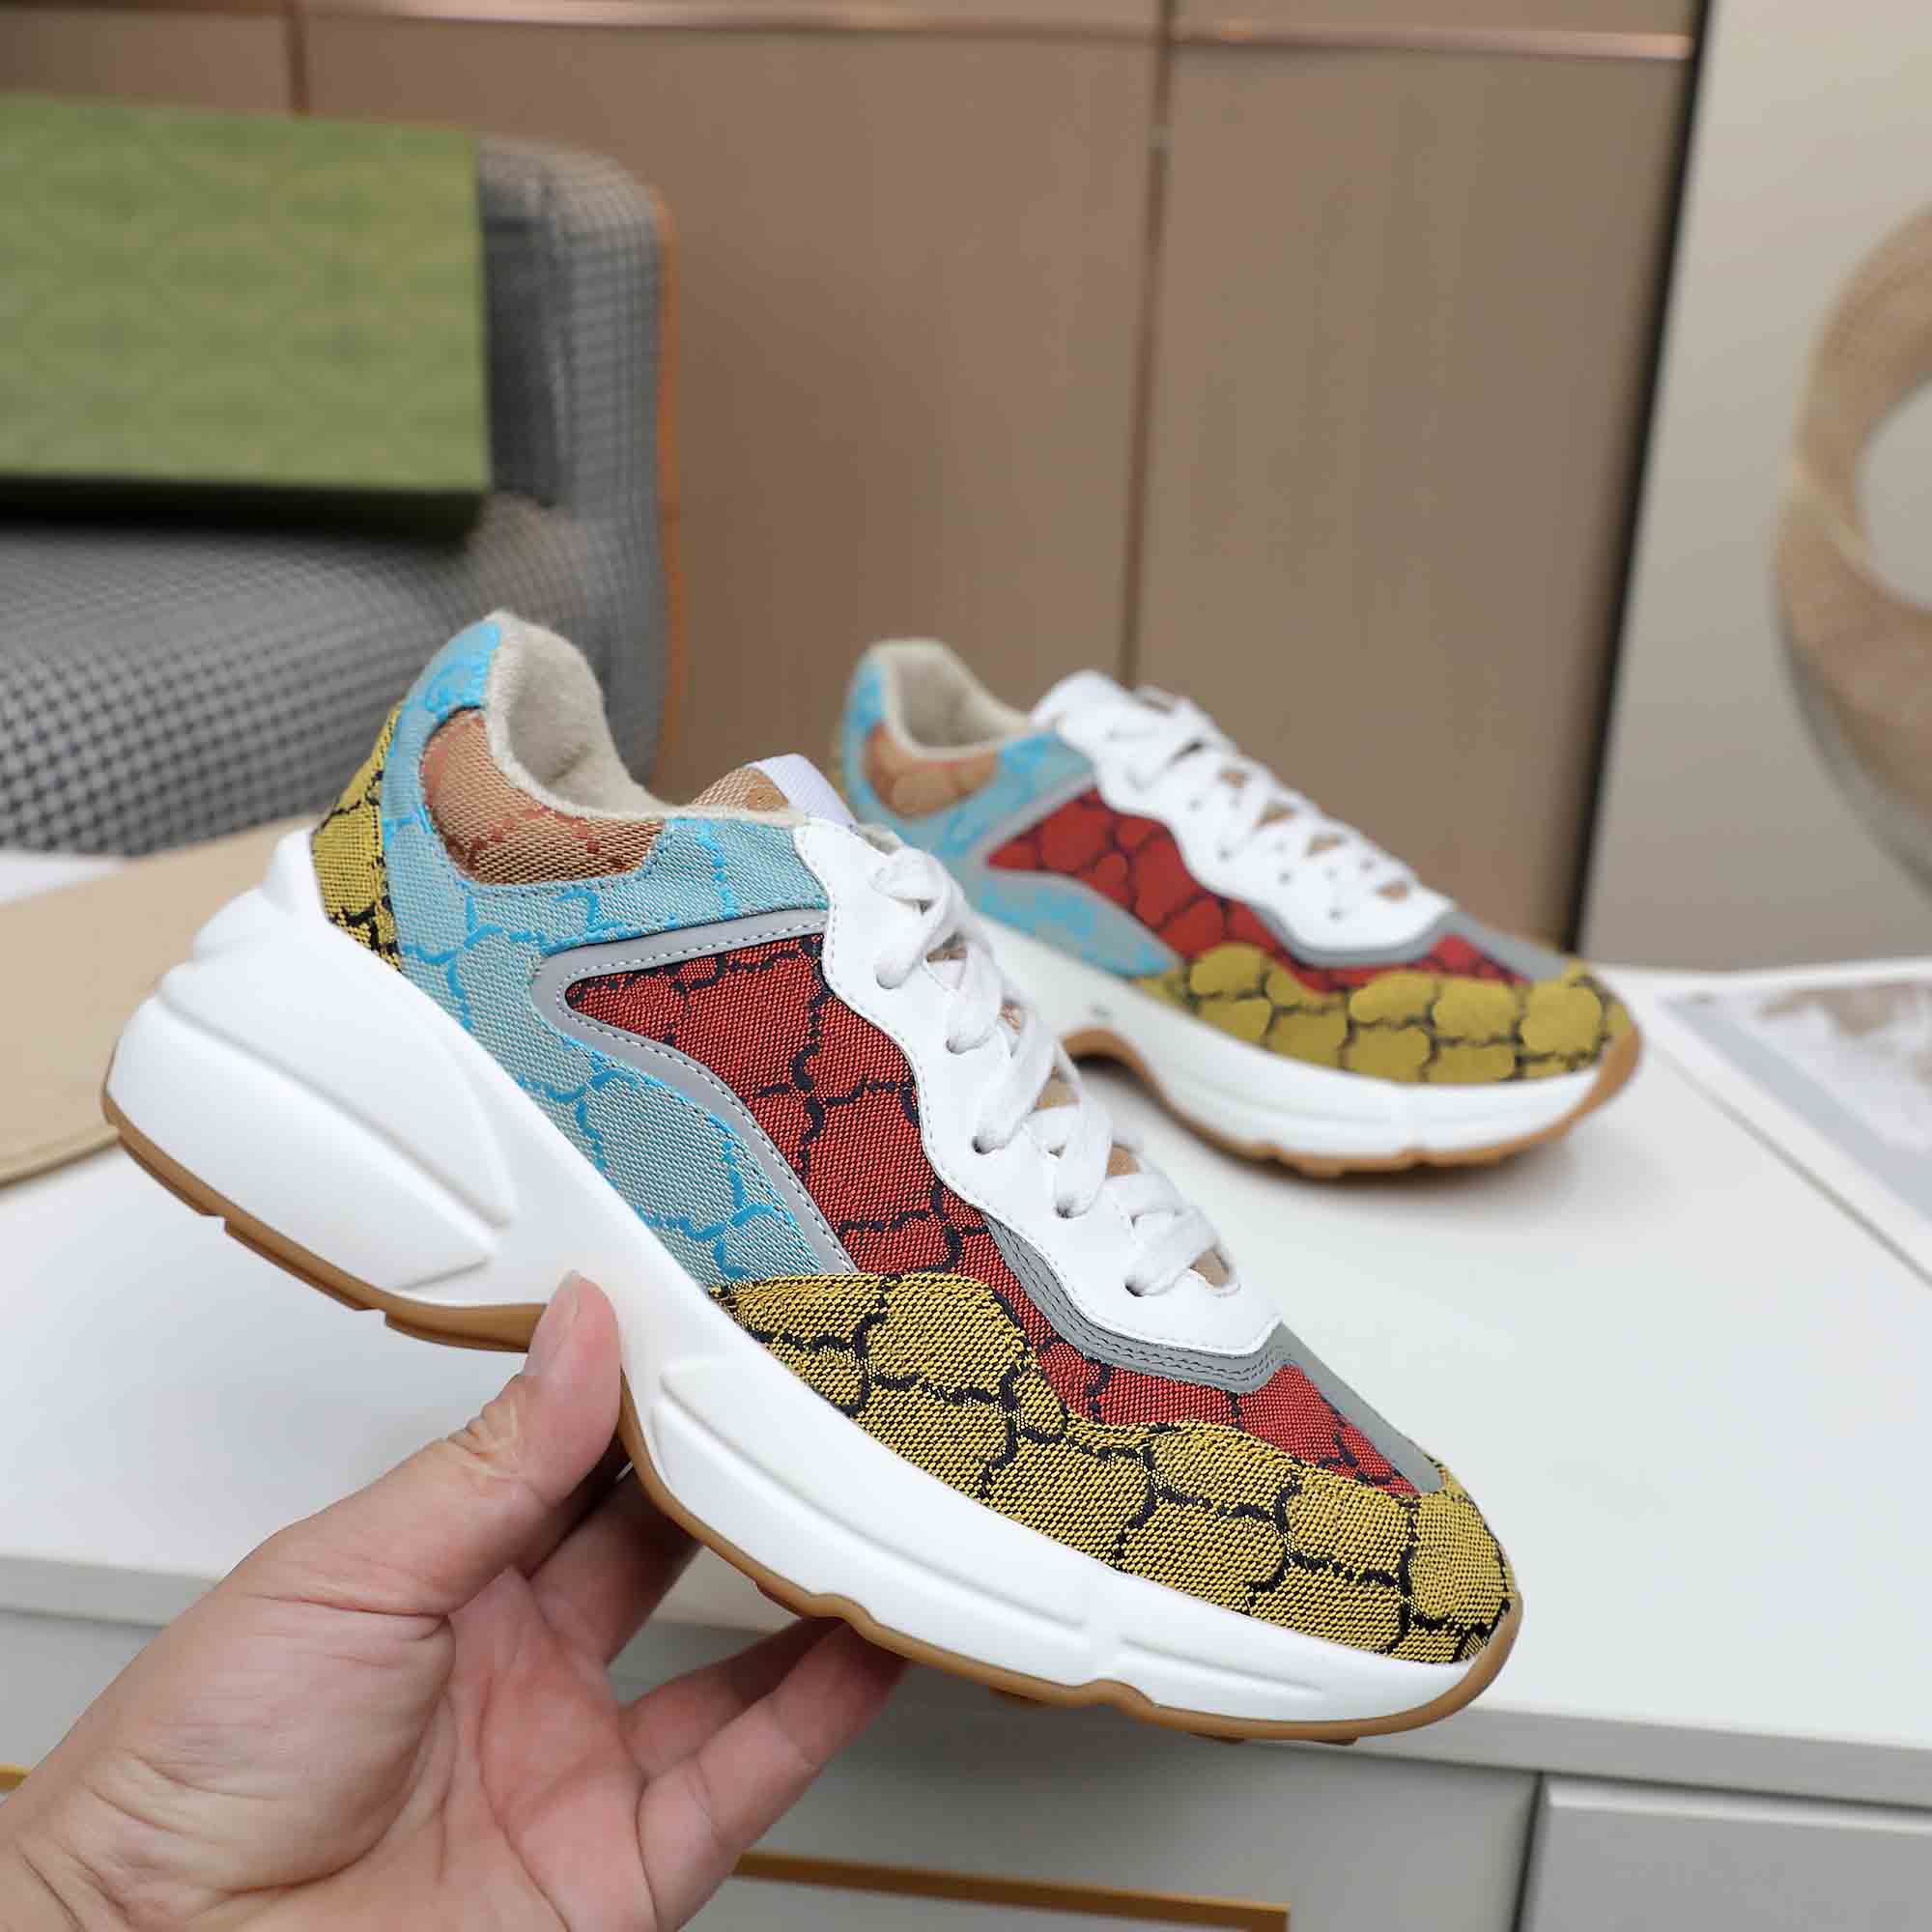 New casual shoes daddy shoes printed leather classic colorful soft comfortable breathable cushioning vintage couple sneakers men women wear